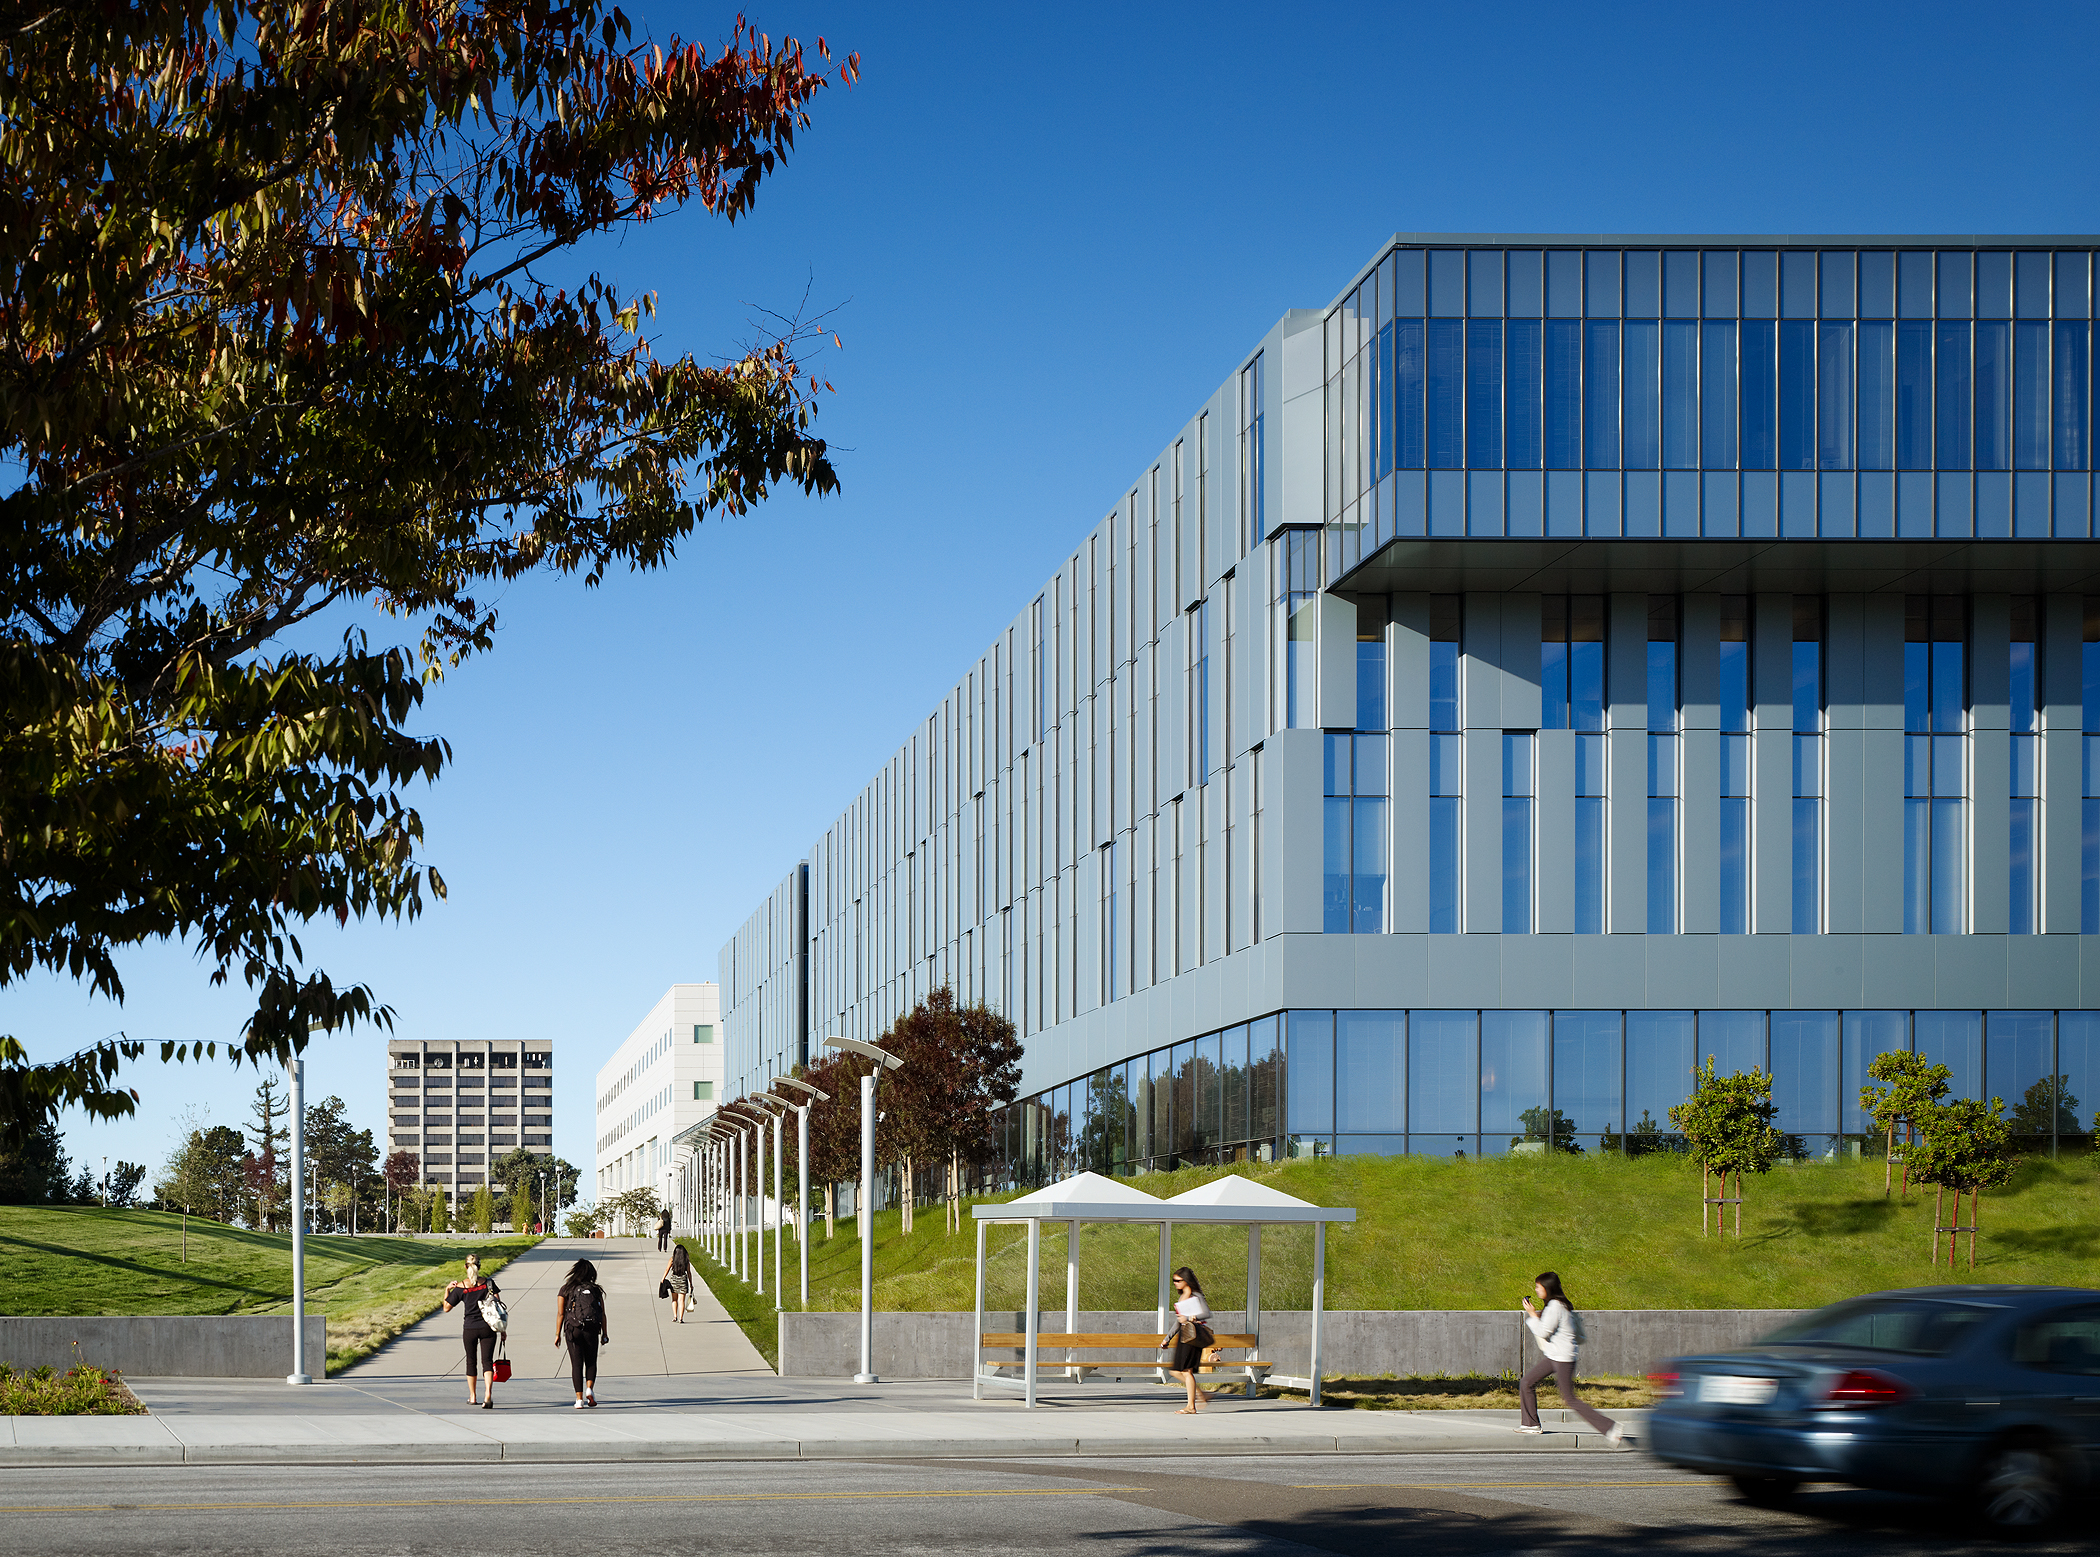 CSU East Bay Student Services & Administration Building